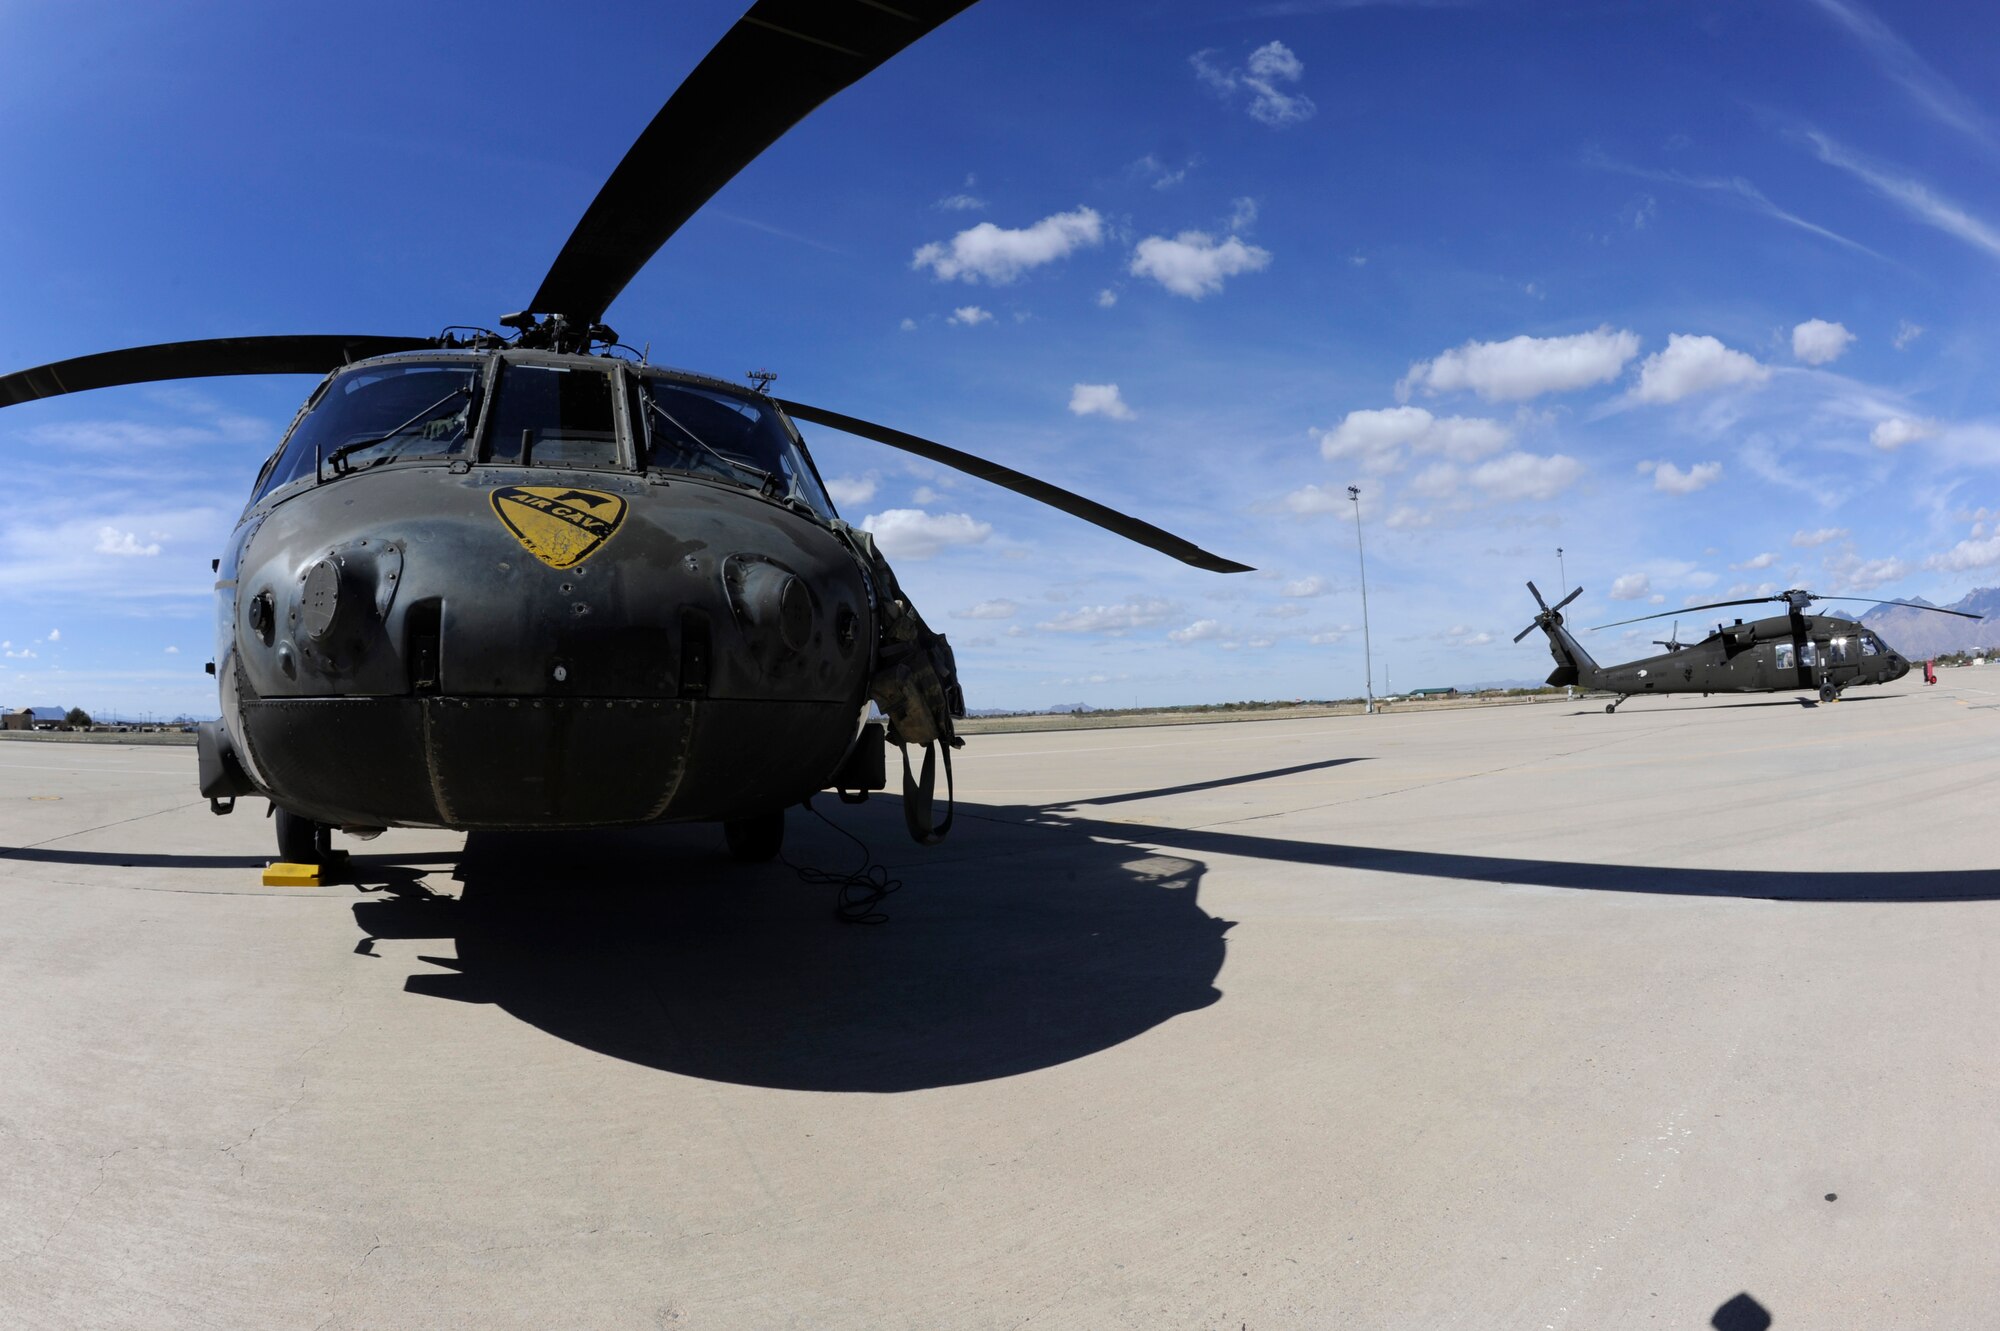 A U.S. Army UH-60 Black Hawk from Fort Hood, Texas awaits fuel at Davis-Monthan Air Force Base, Ariz., Feb. 7, 2014. The aircraft, assigned to the 3-227th Assault Helicopter Battalion, 1st Air Calvary Brigade, 1st Cavalry Division, travelled through D-M on their way to training in California. (U.S. Air Force photo by Airman 1st Class Betty R. Chevalier/released)